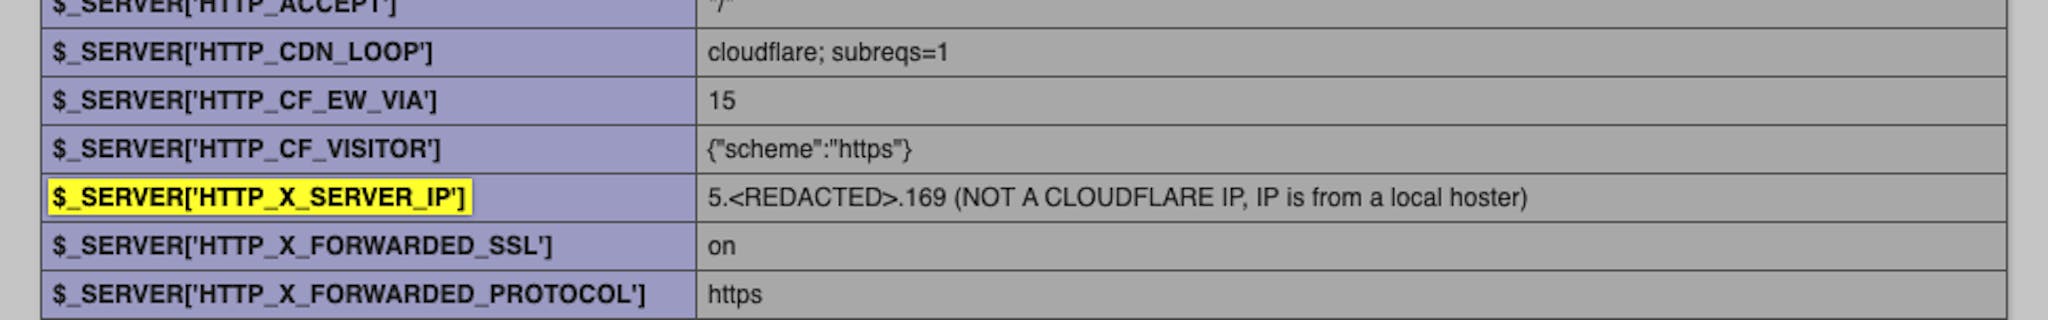 Cloudflare bypass with direct server IP